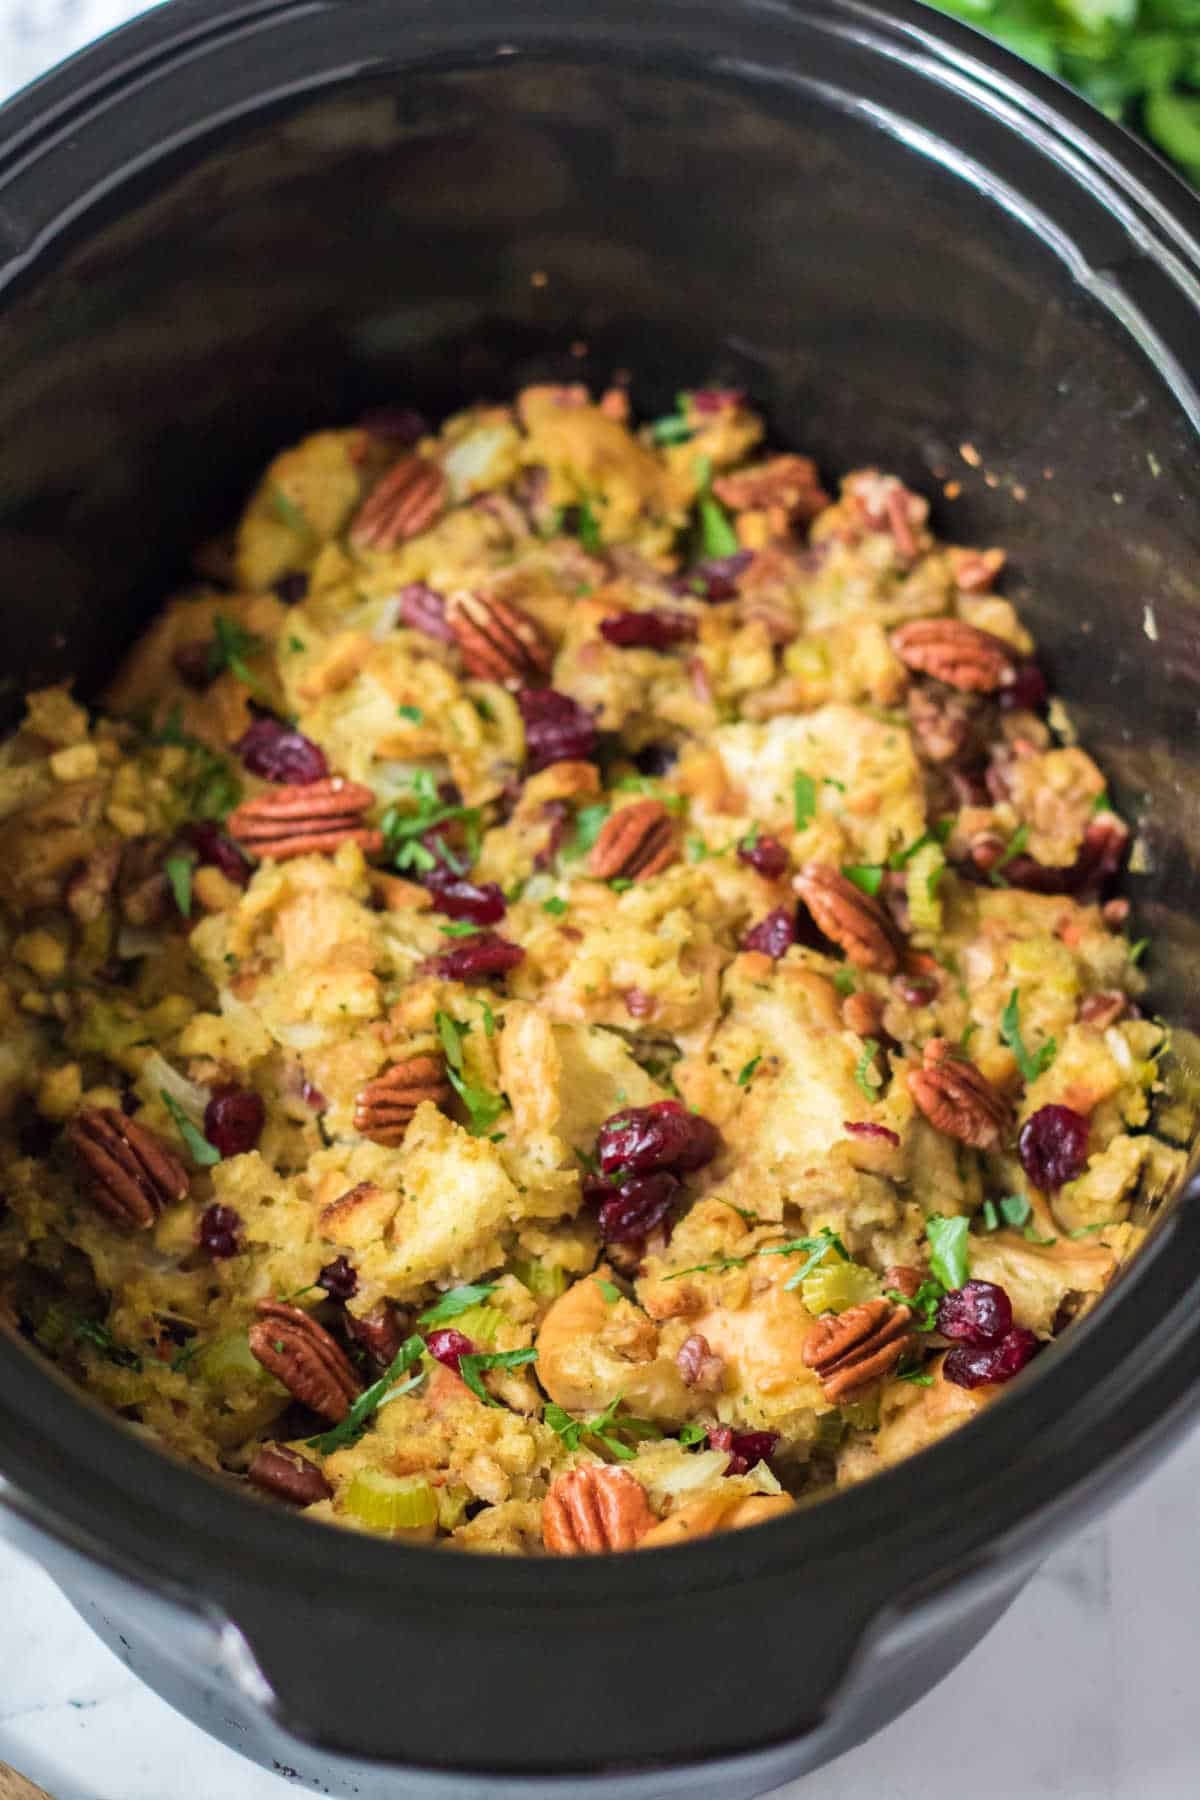 Cranberry pecan stuffing in a black crockpot.